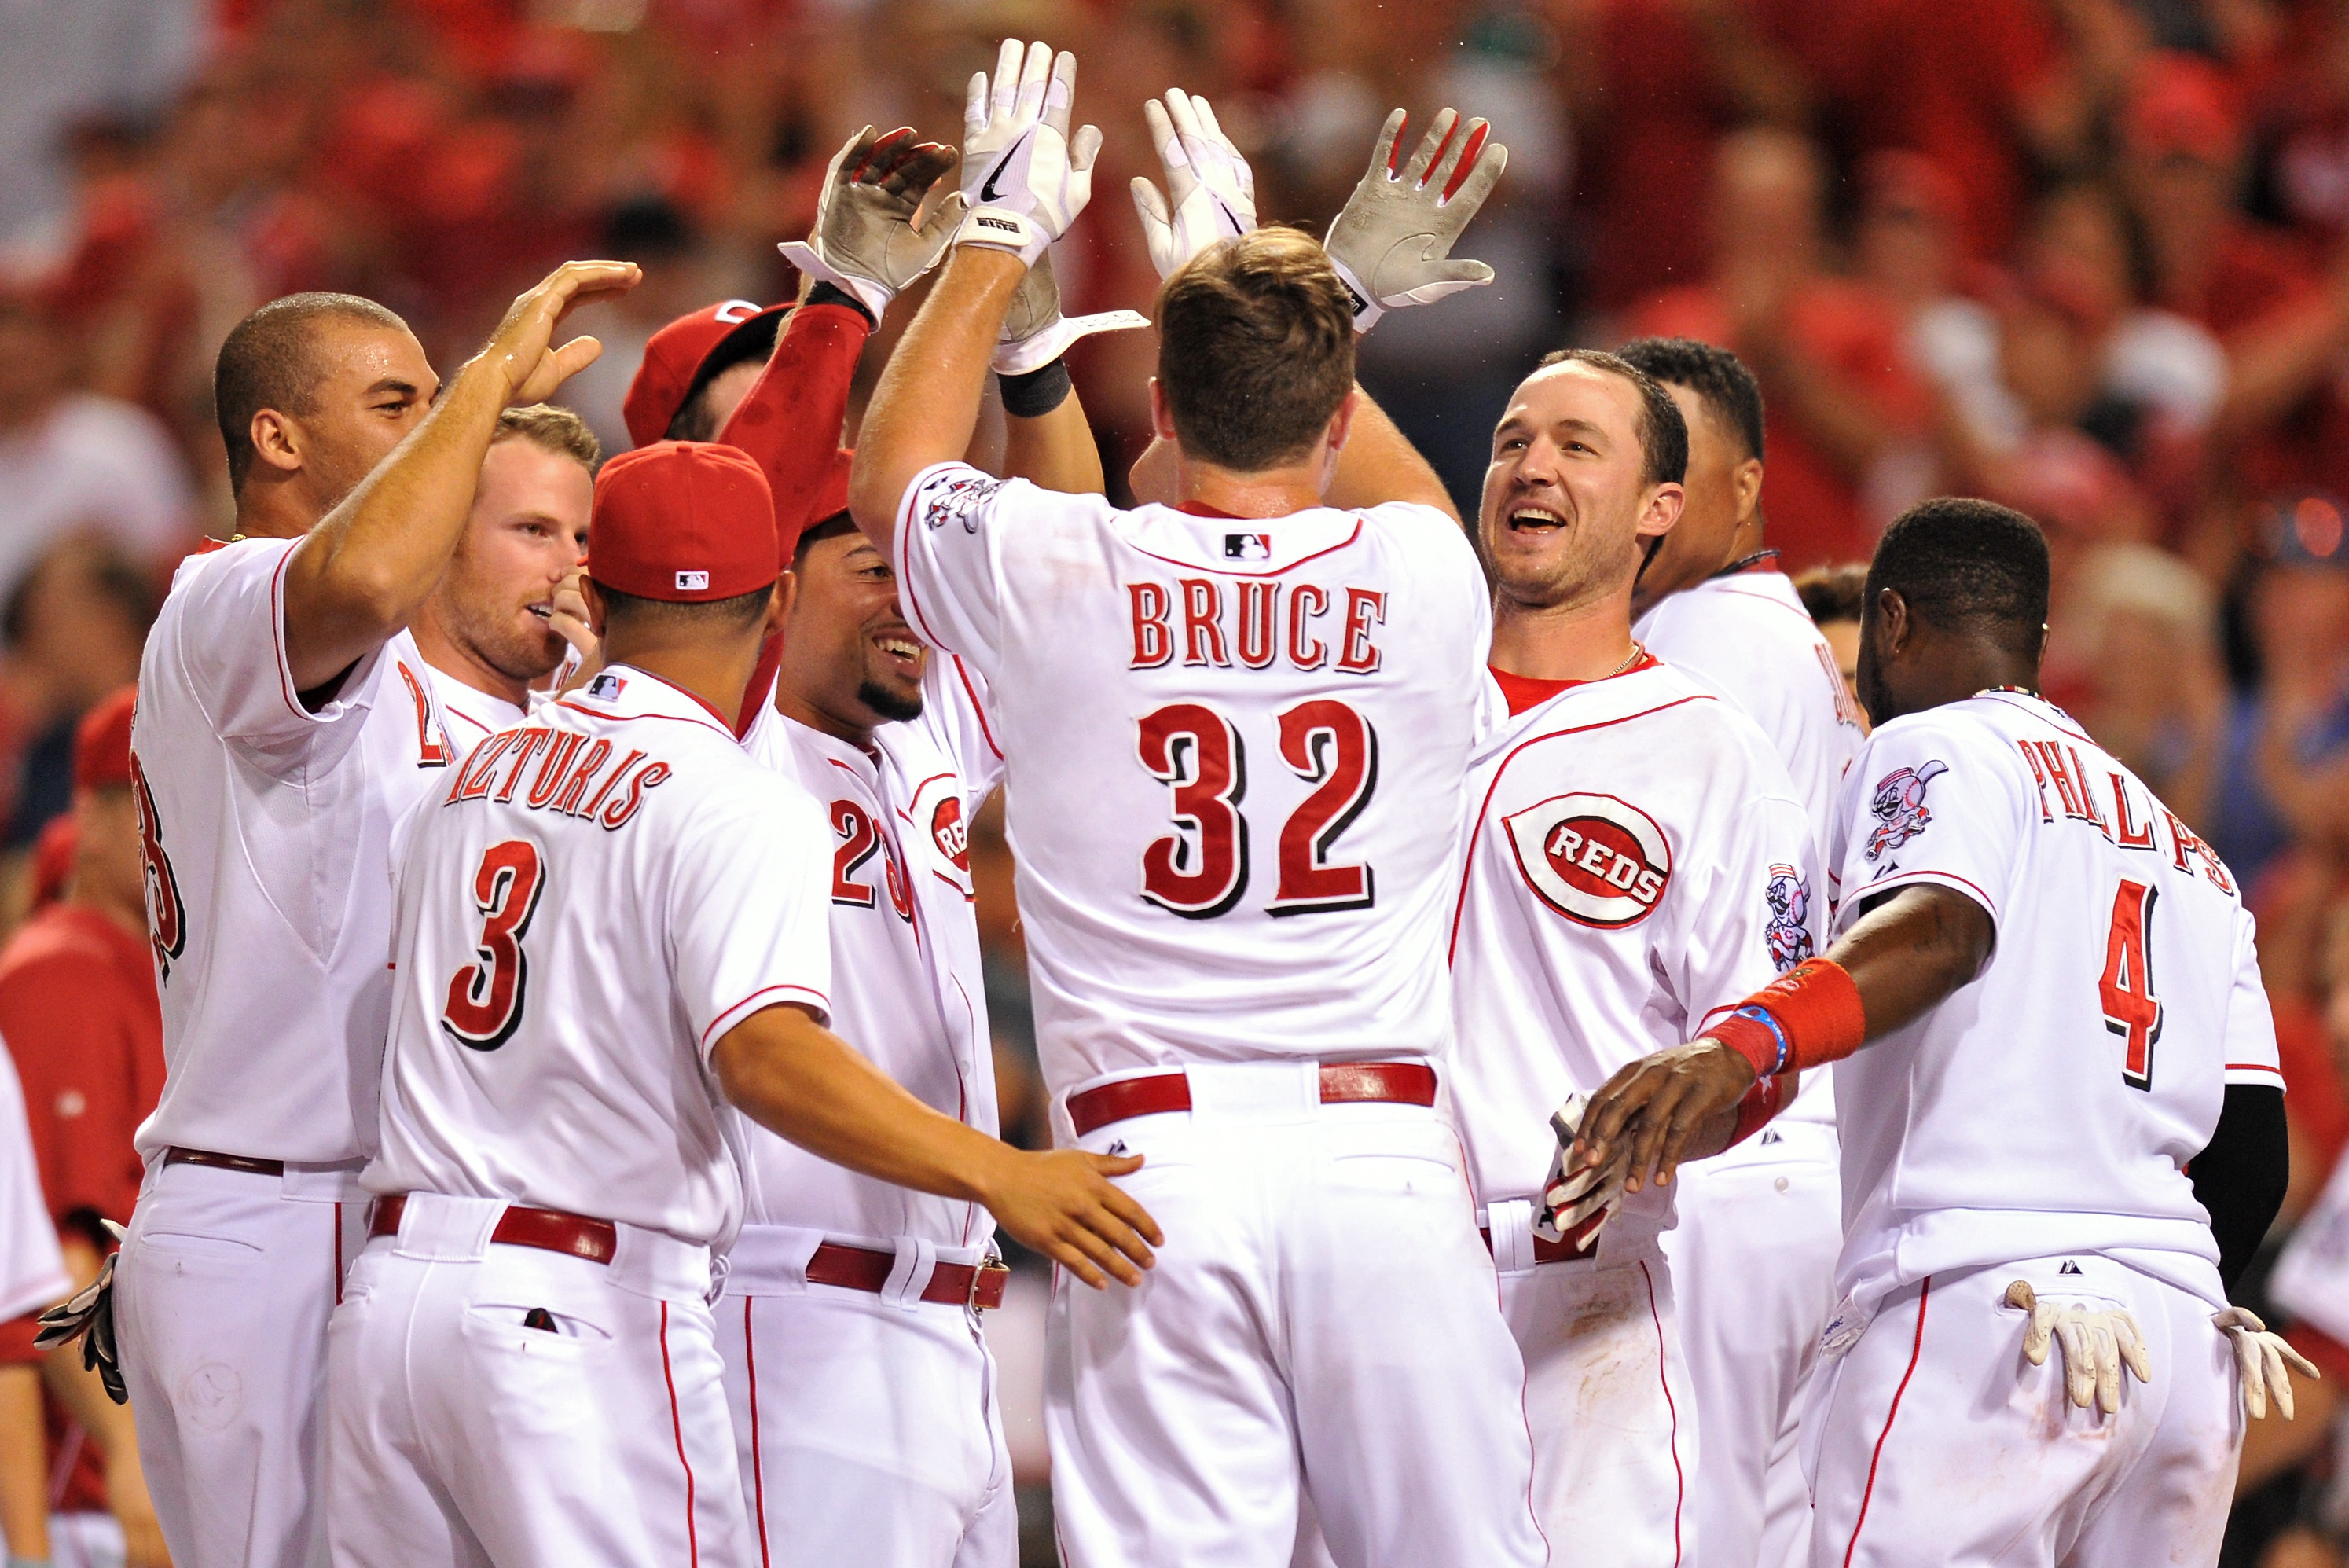 Frazier's homer rallies Reds to opening 5-2 win over Pirates